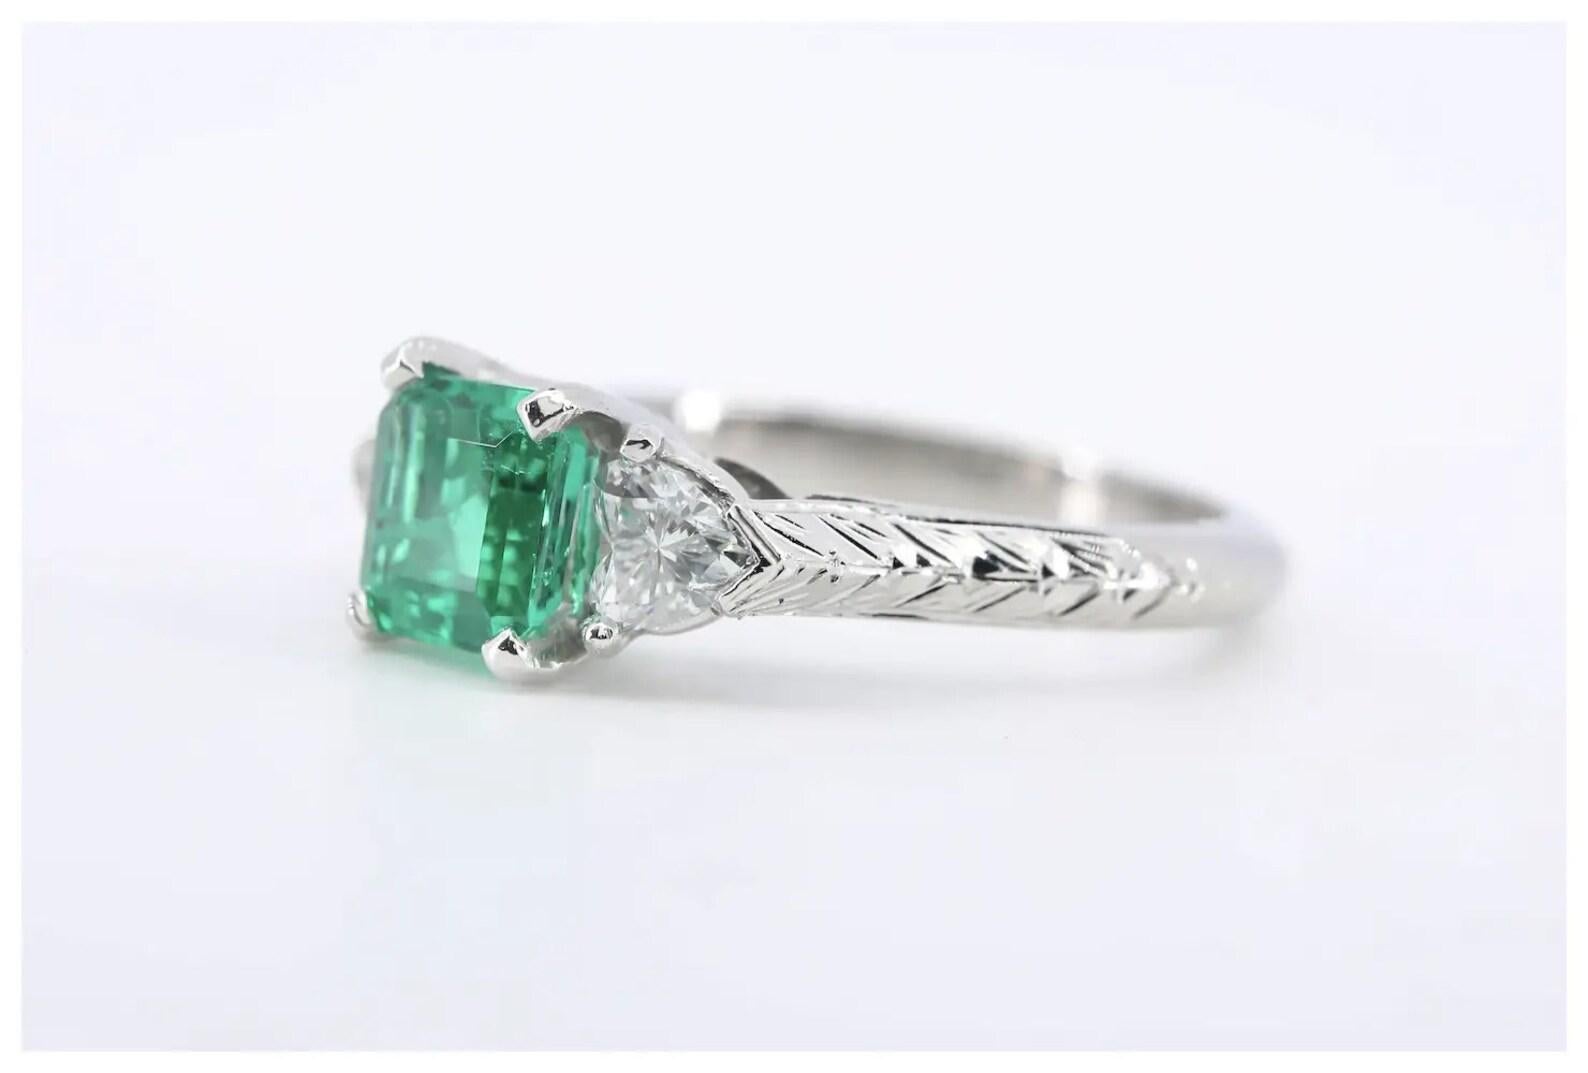 A handmade vintage Emerald and Diamond ring crafted in platinum.

Centered by a very fine emerald cut 1.02 carat Colombian emerald of intense green color.

Framed by a pair of 0.40ctw heart shaped brilliant cut diamonds of G color and VS2